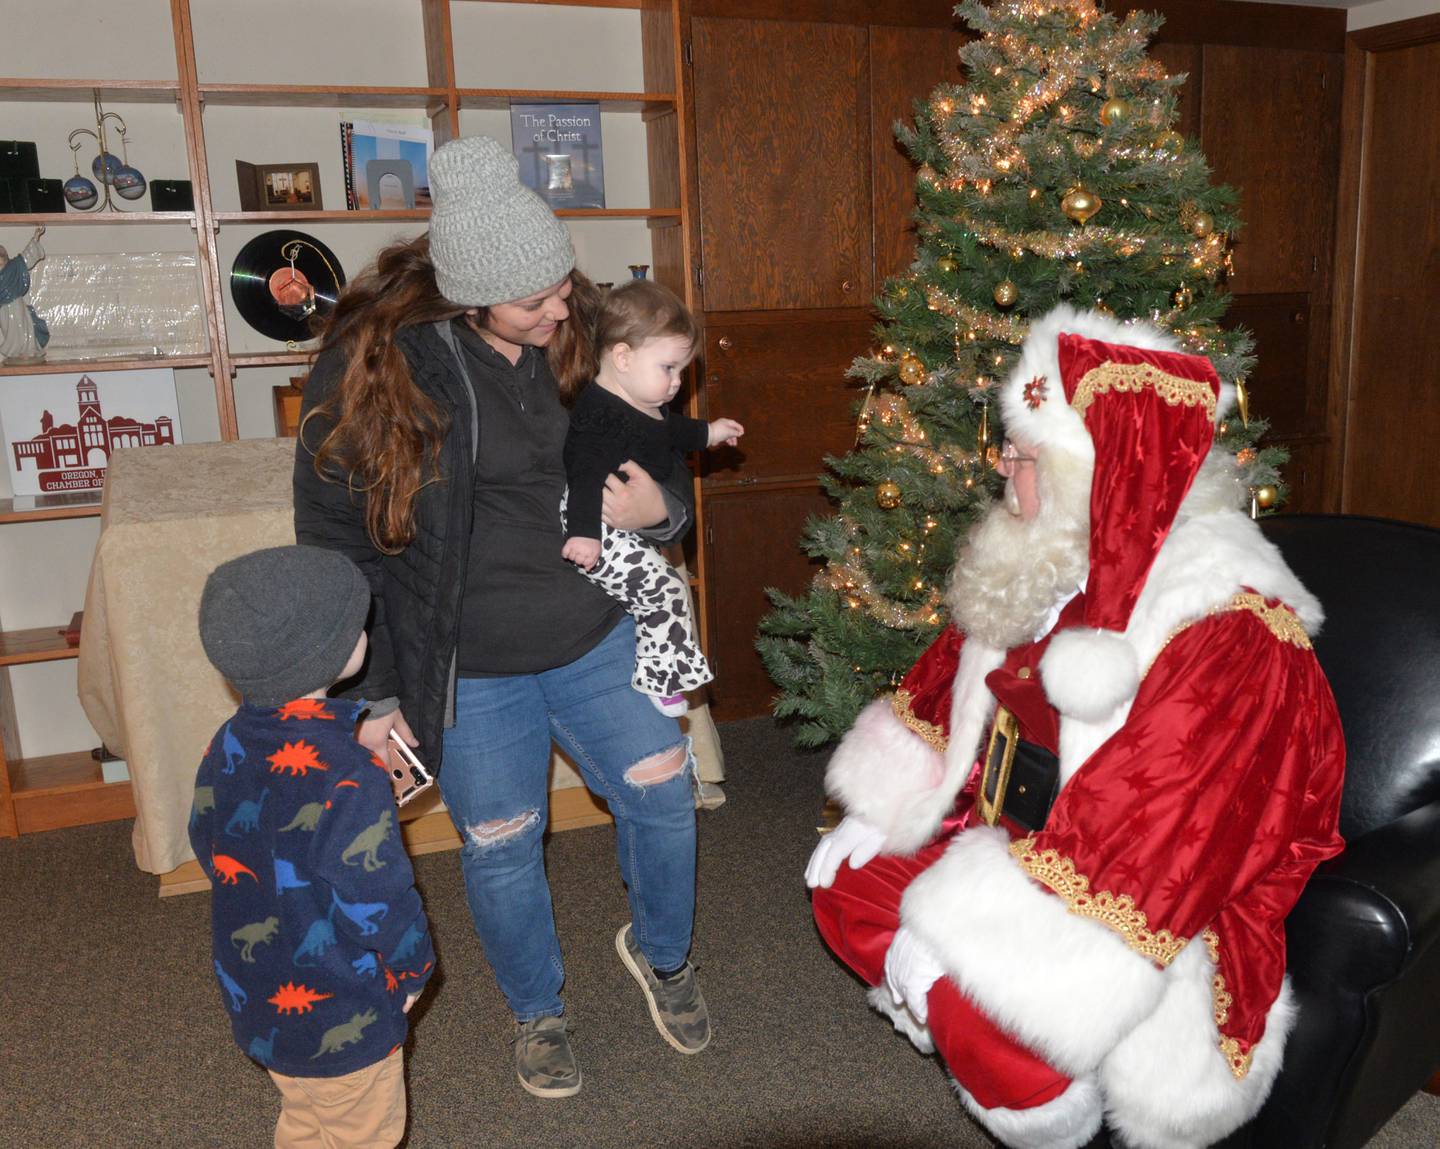 The Schopp family of Oregon visited with Santa Claus during Oregon's Candlelight Walk on Saturday, Nov. 25. 2023. Here, Carson, 3, and his sister Kelsey, 11 months, and their mom, Kelsey, visit with Santa. The event also included Christmas music, shopping specials, and visits with Santa.